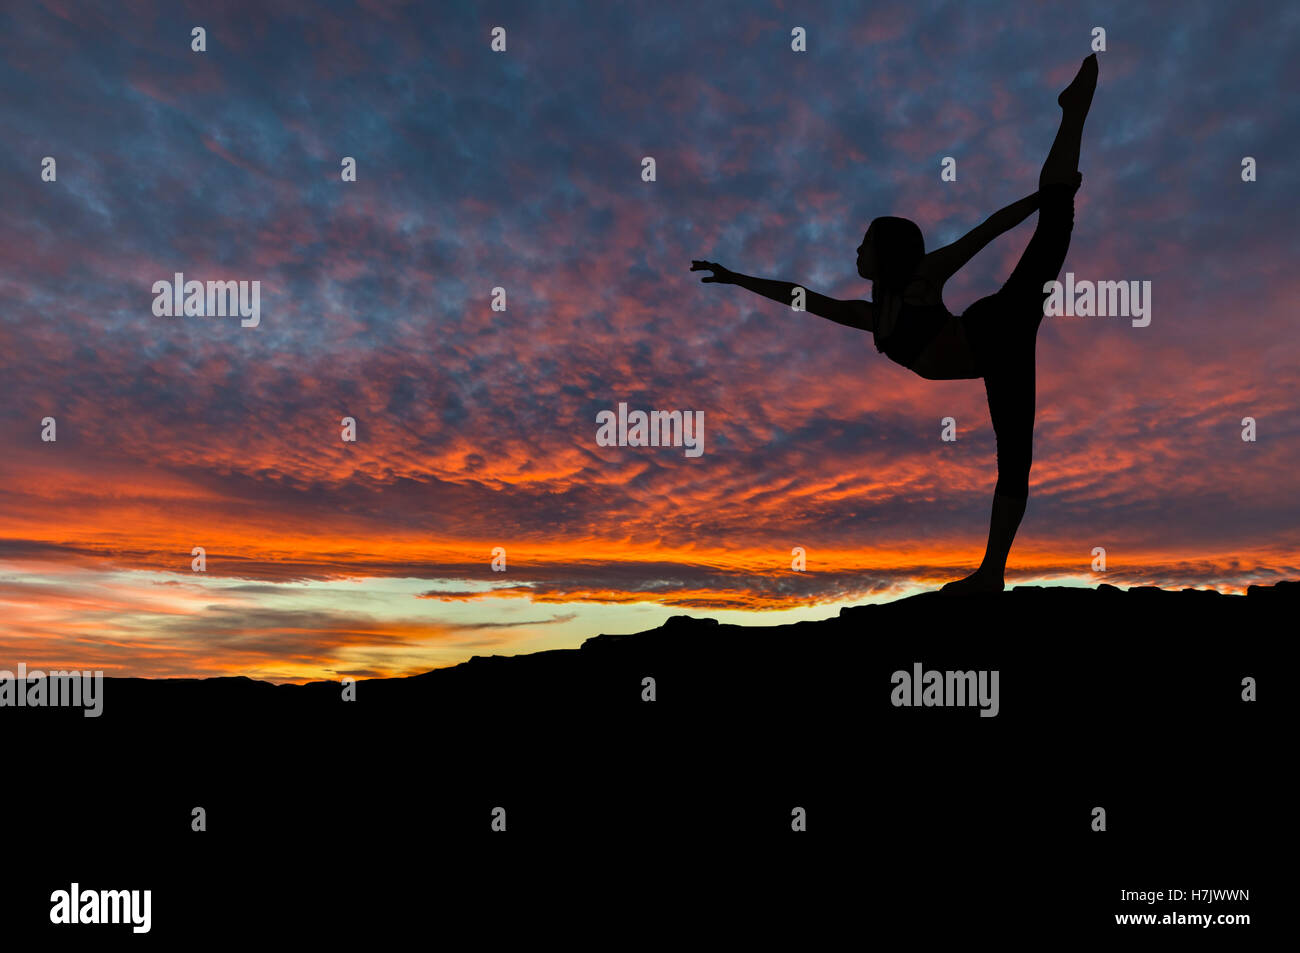 Silhouette of woman dancing and exercising on mountain top with sunset sky in the background. Stock Photo